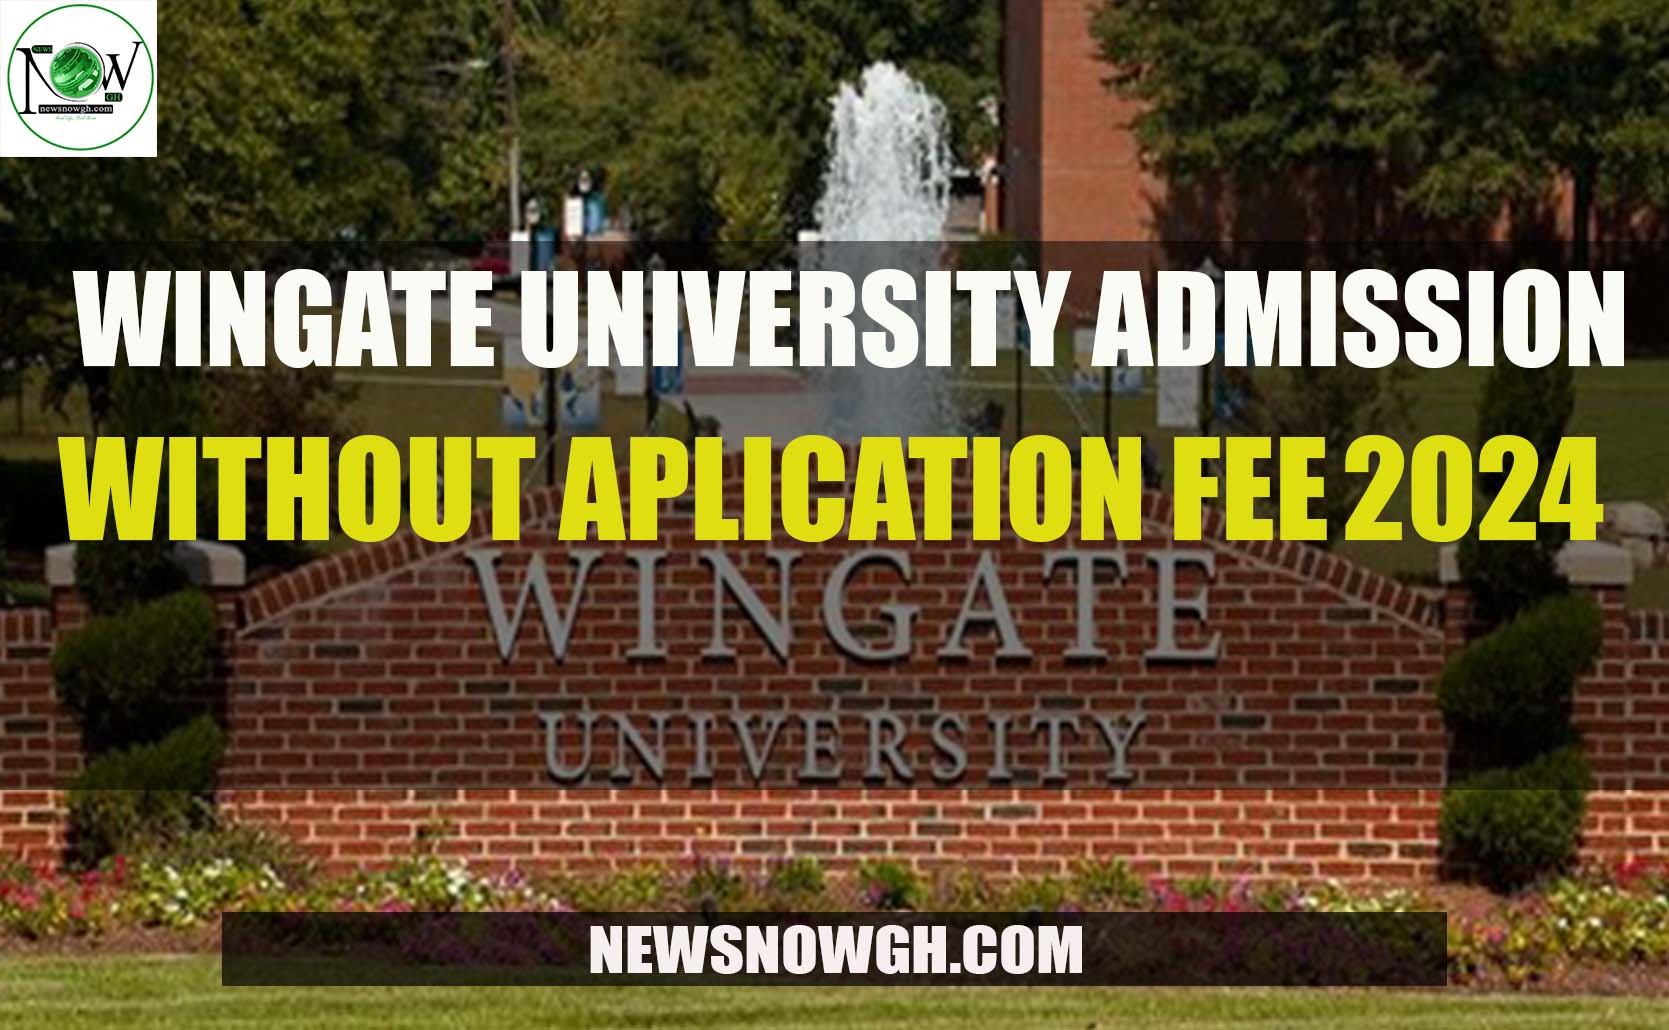 Wingate University admissions without application fee for 202425